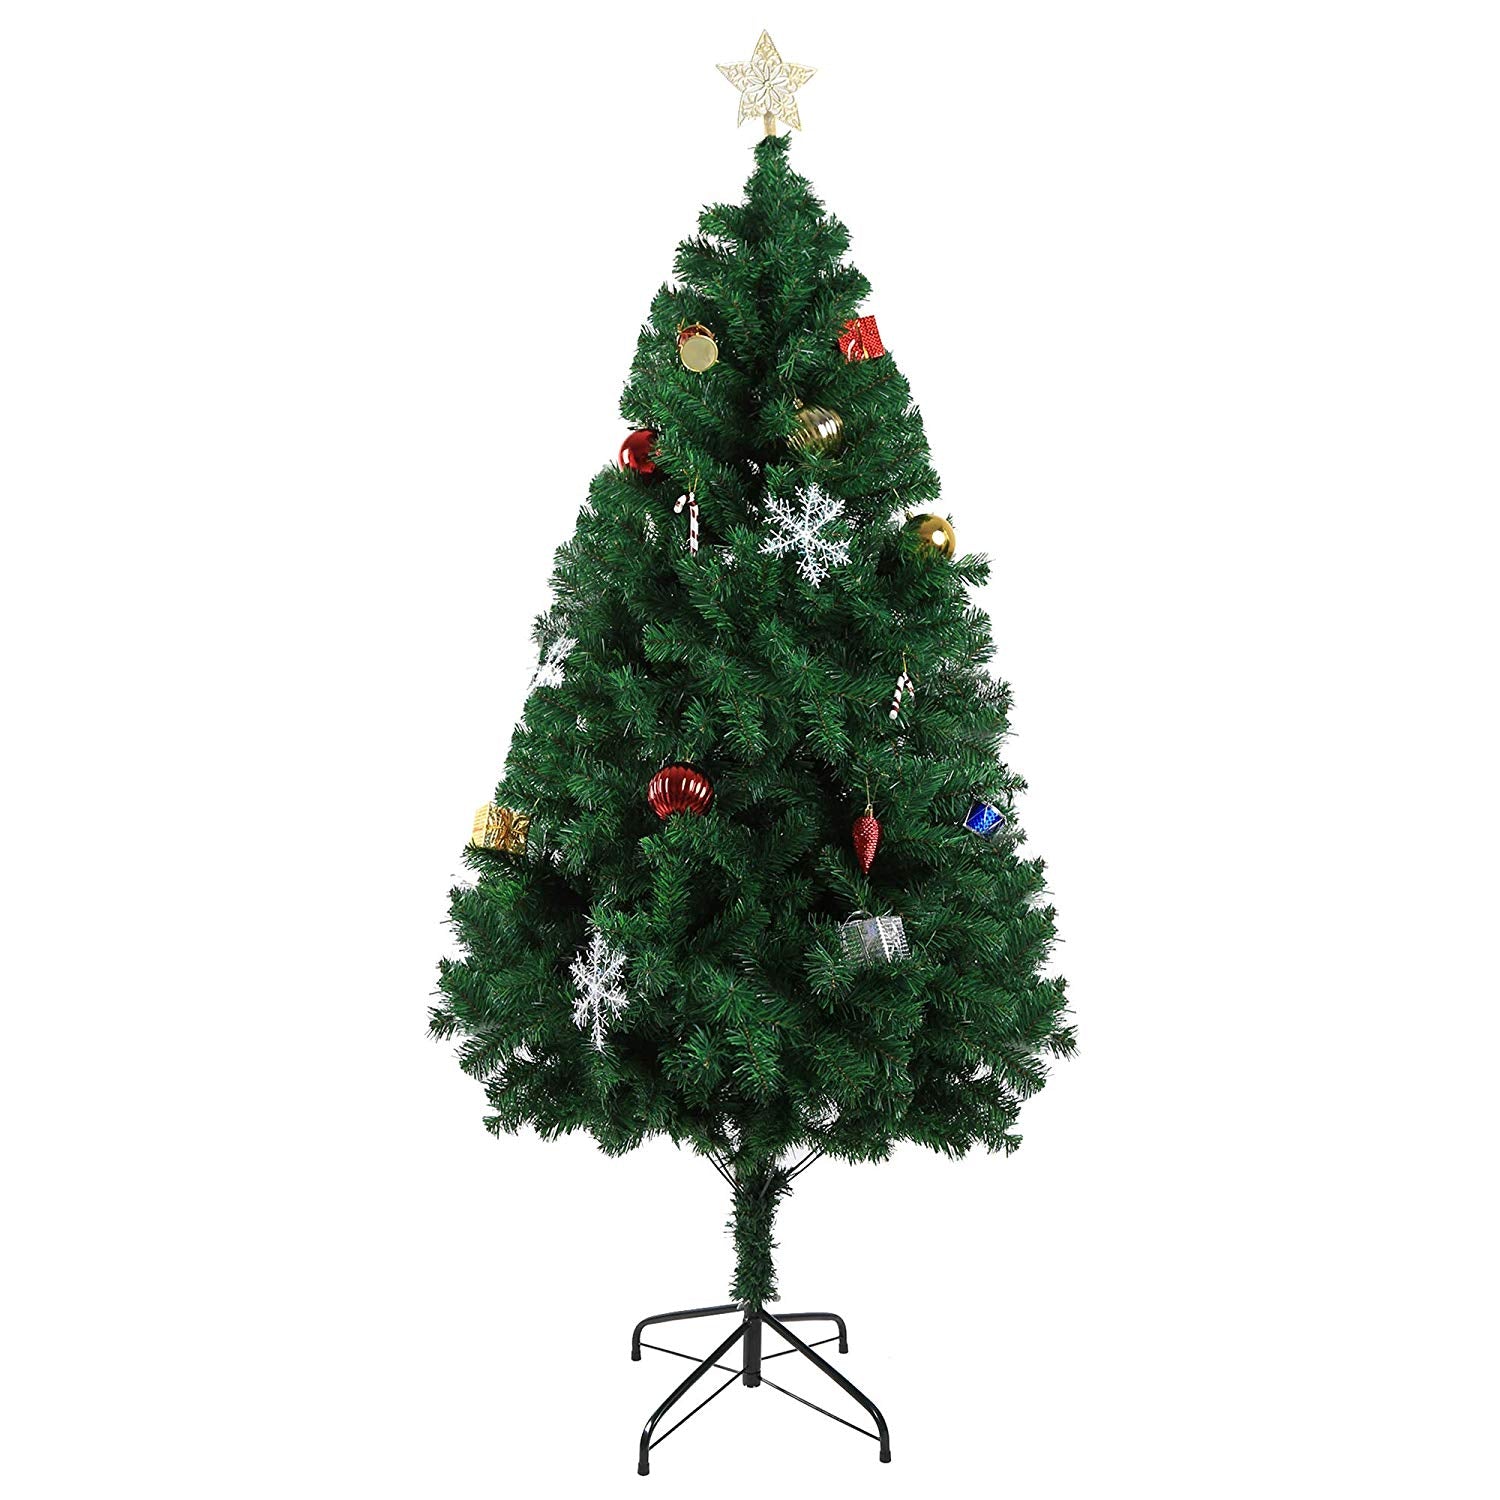 6' Premium Spruce Artificial Christmas Tree w/Metal Stand, Green